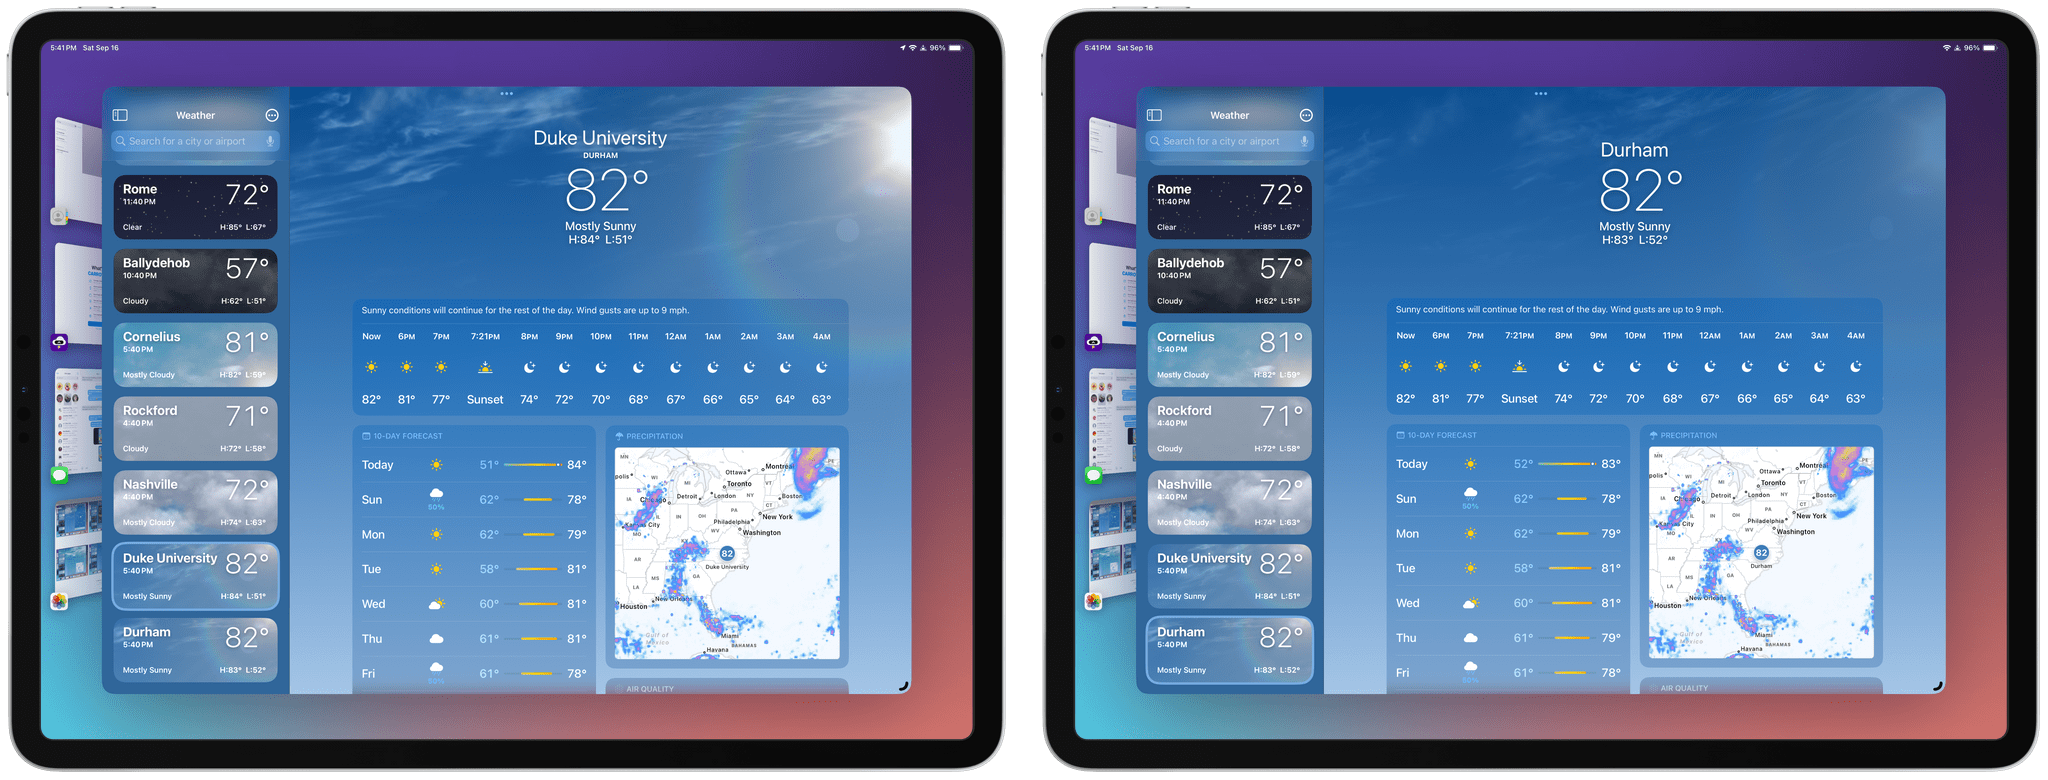 Hyperlocal weather is now available in the Weather app.